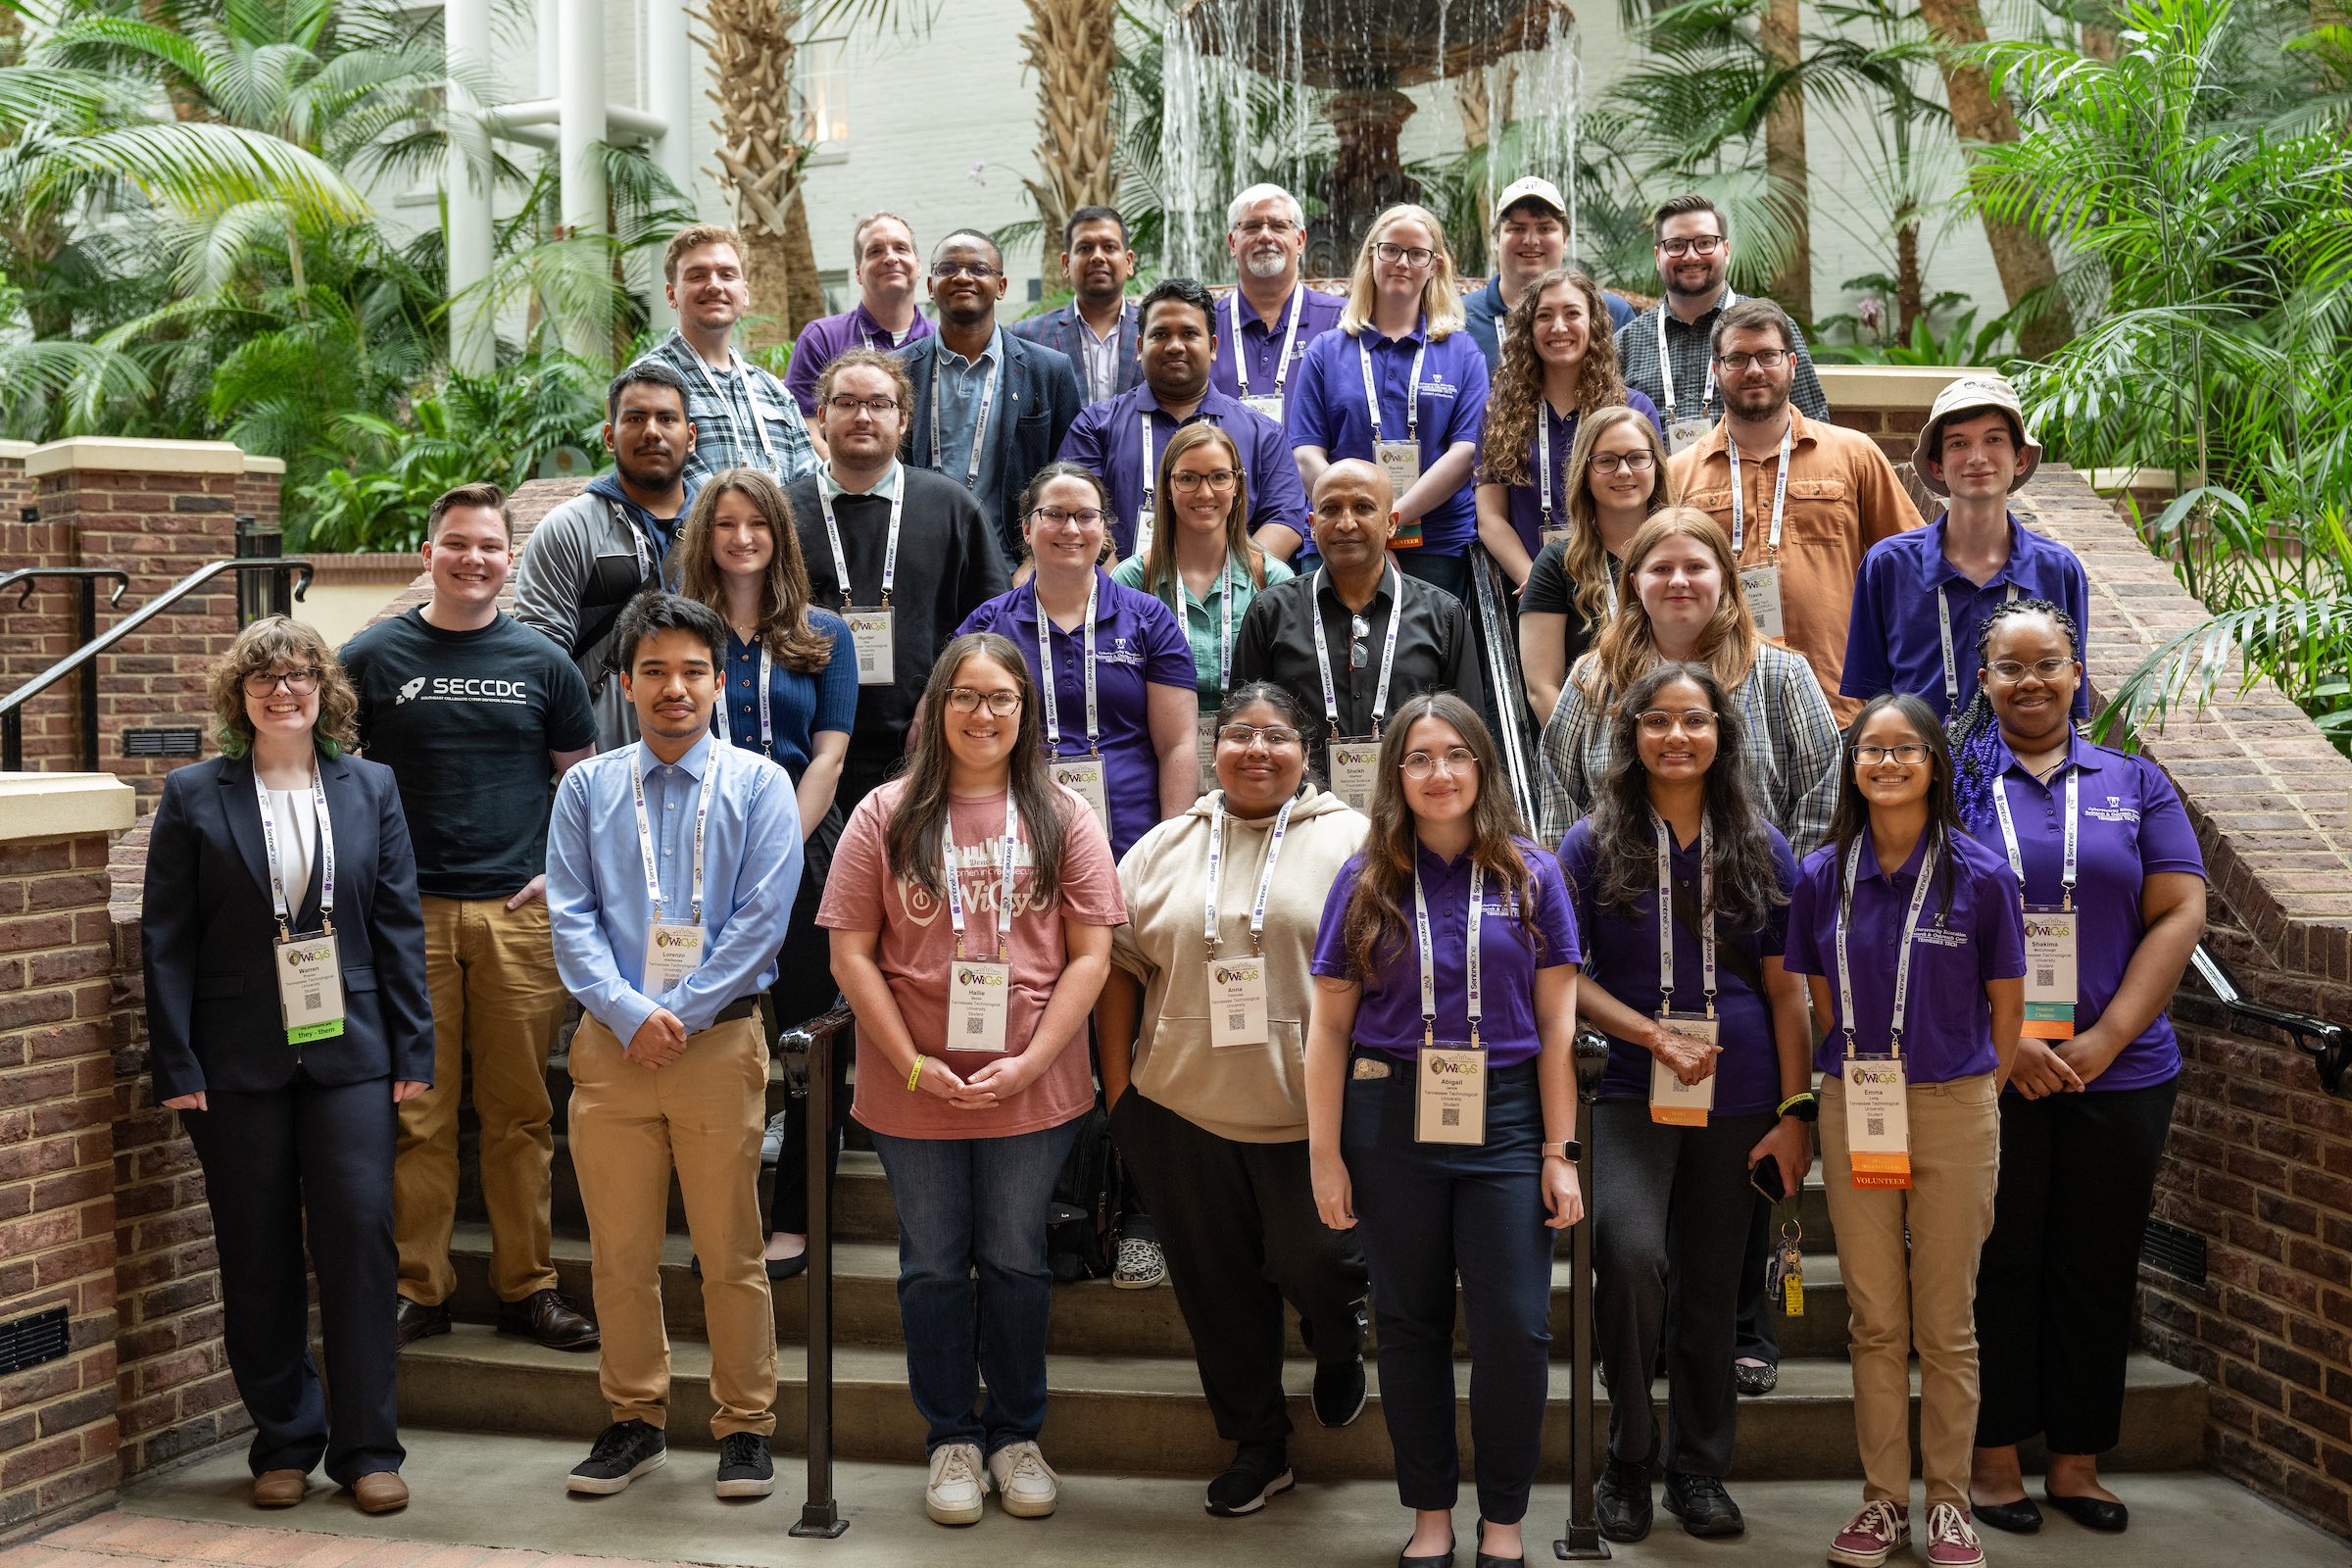 Tennessee Tech students and faculty are pictured at the 10th annual Women in Cybersecurity (WiCyS) conference in Nashville, Tenn.